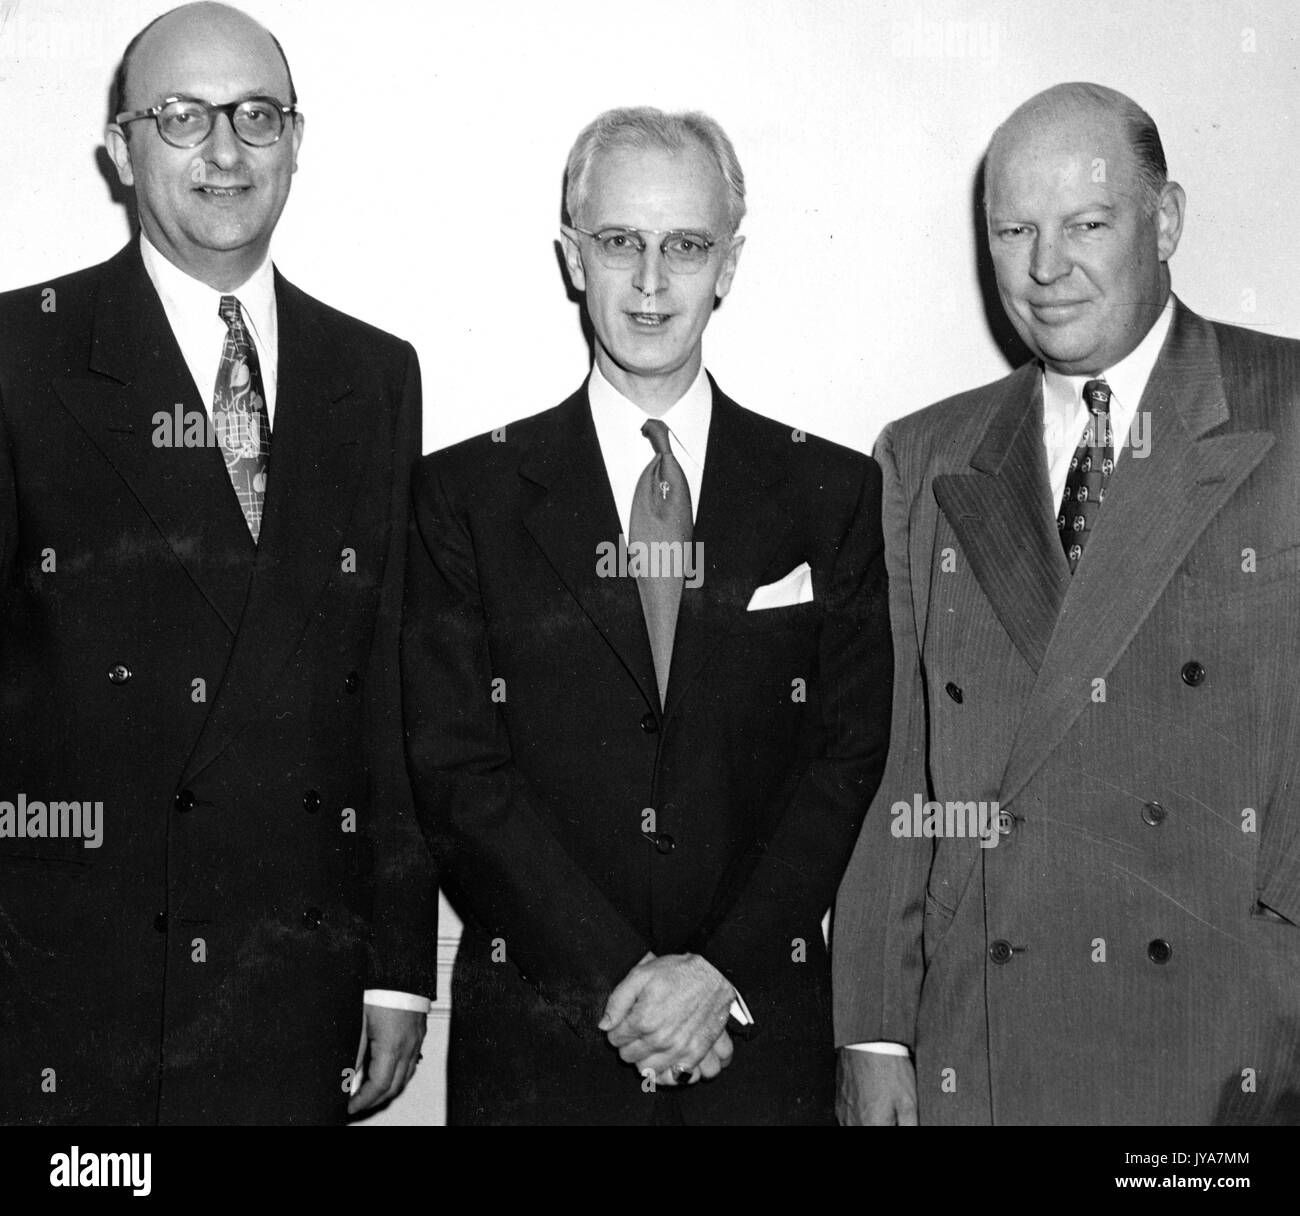 Executive Ben Cohen, American television host Lynn Poole, and Dr Allen B DuMont are standing in order from left to right, they are all wearing business suits and ties, they are smiling for the camera, 1950. Stock Photo